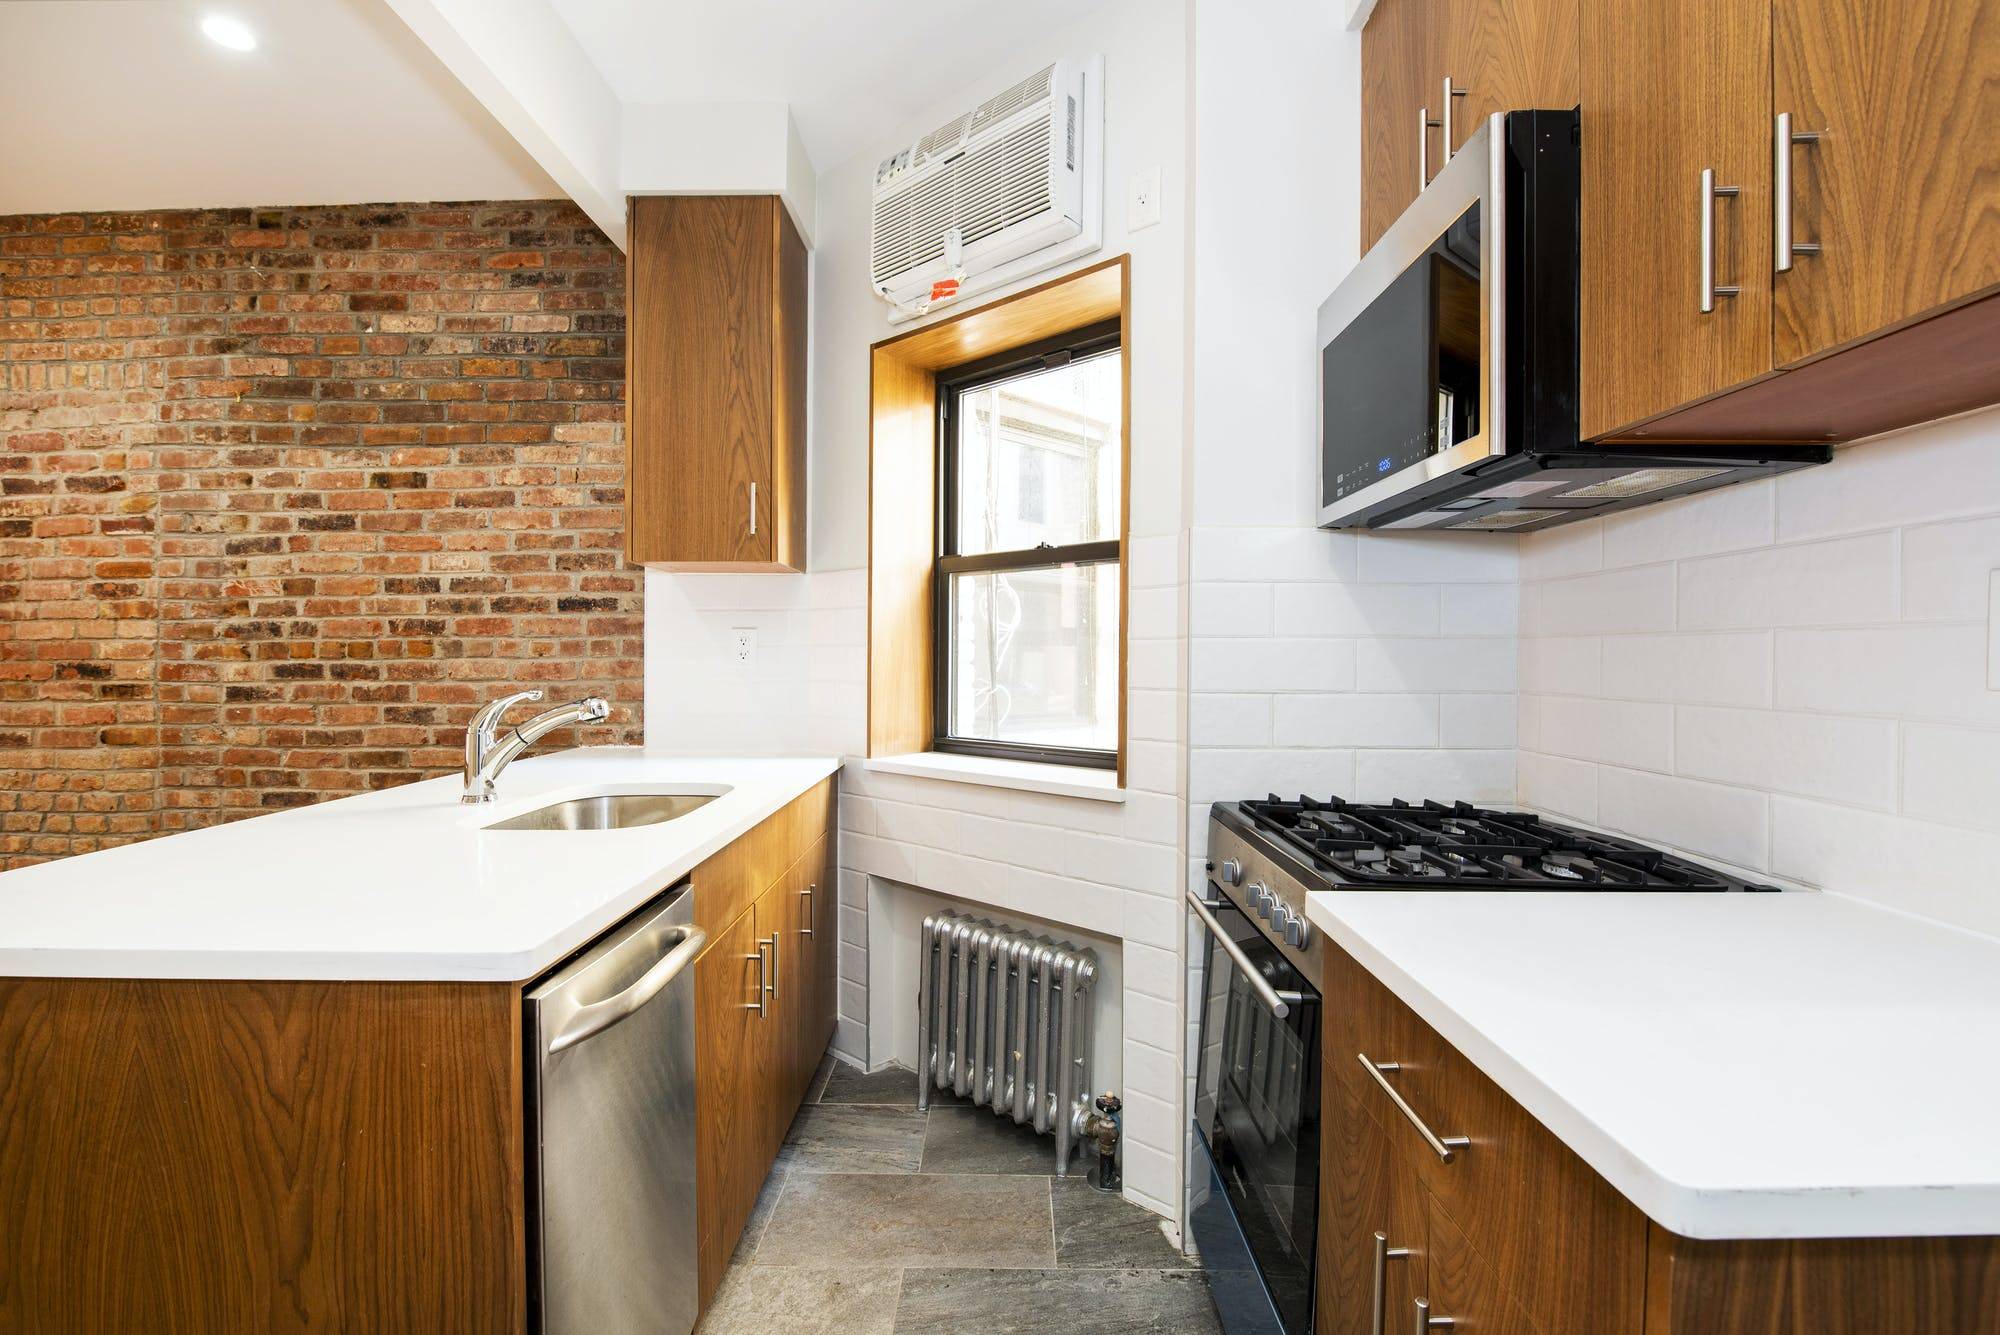 100 Suffolk Street, Apartment 3D between Rivington and Delancey Street SPONSOR UNIT RENOVATED 2 BEDROOM APARTMENT a PRIVATE LAYOUT a PRIME LES LOCATION !